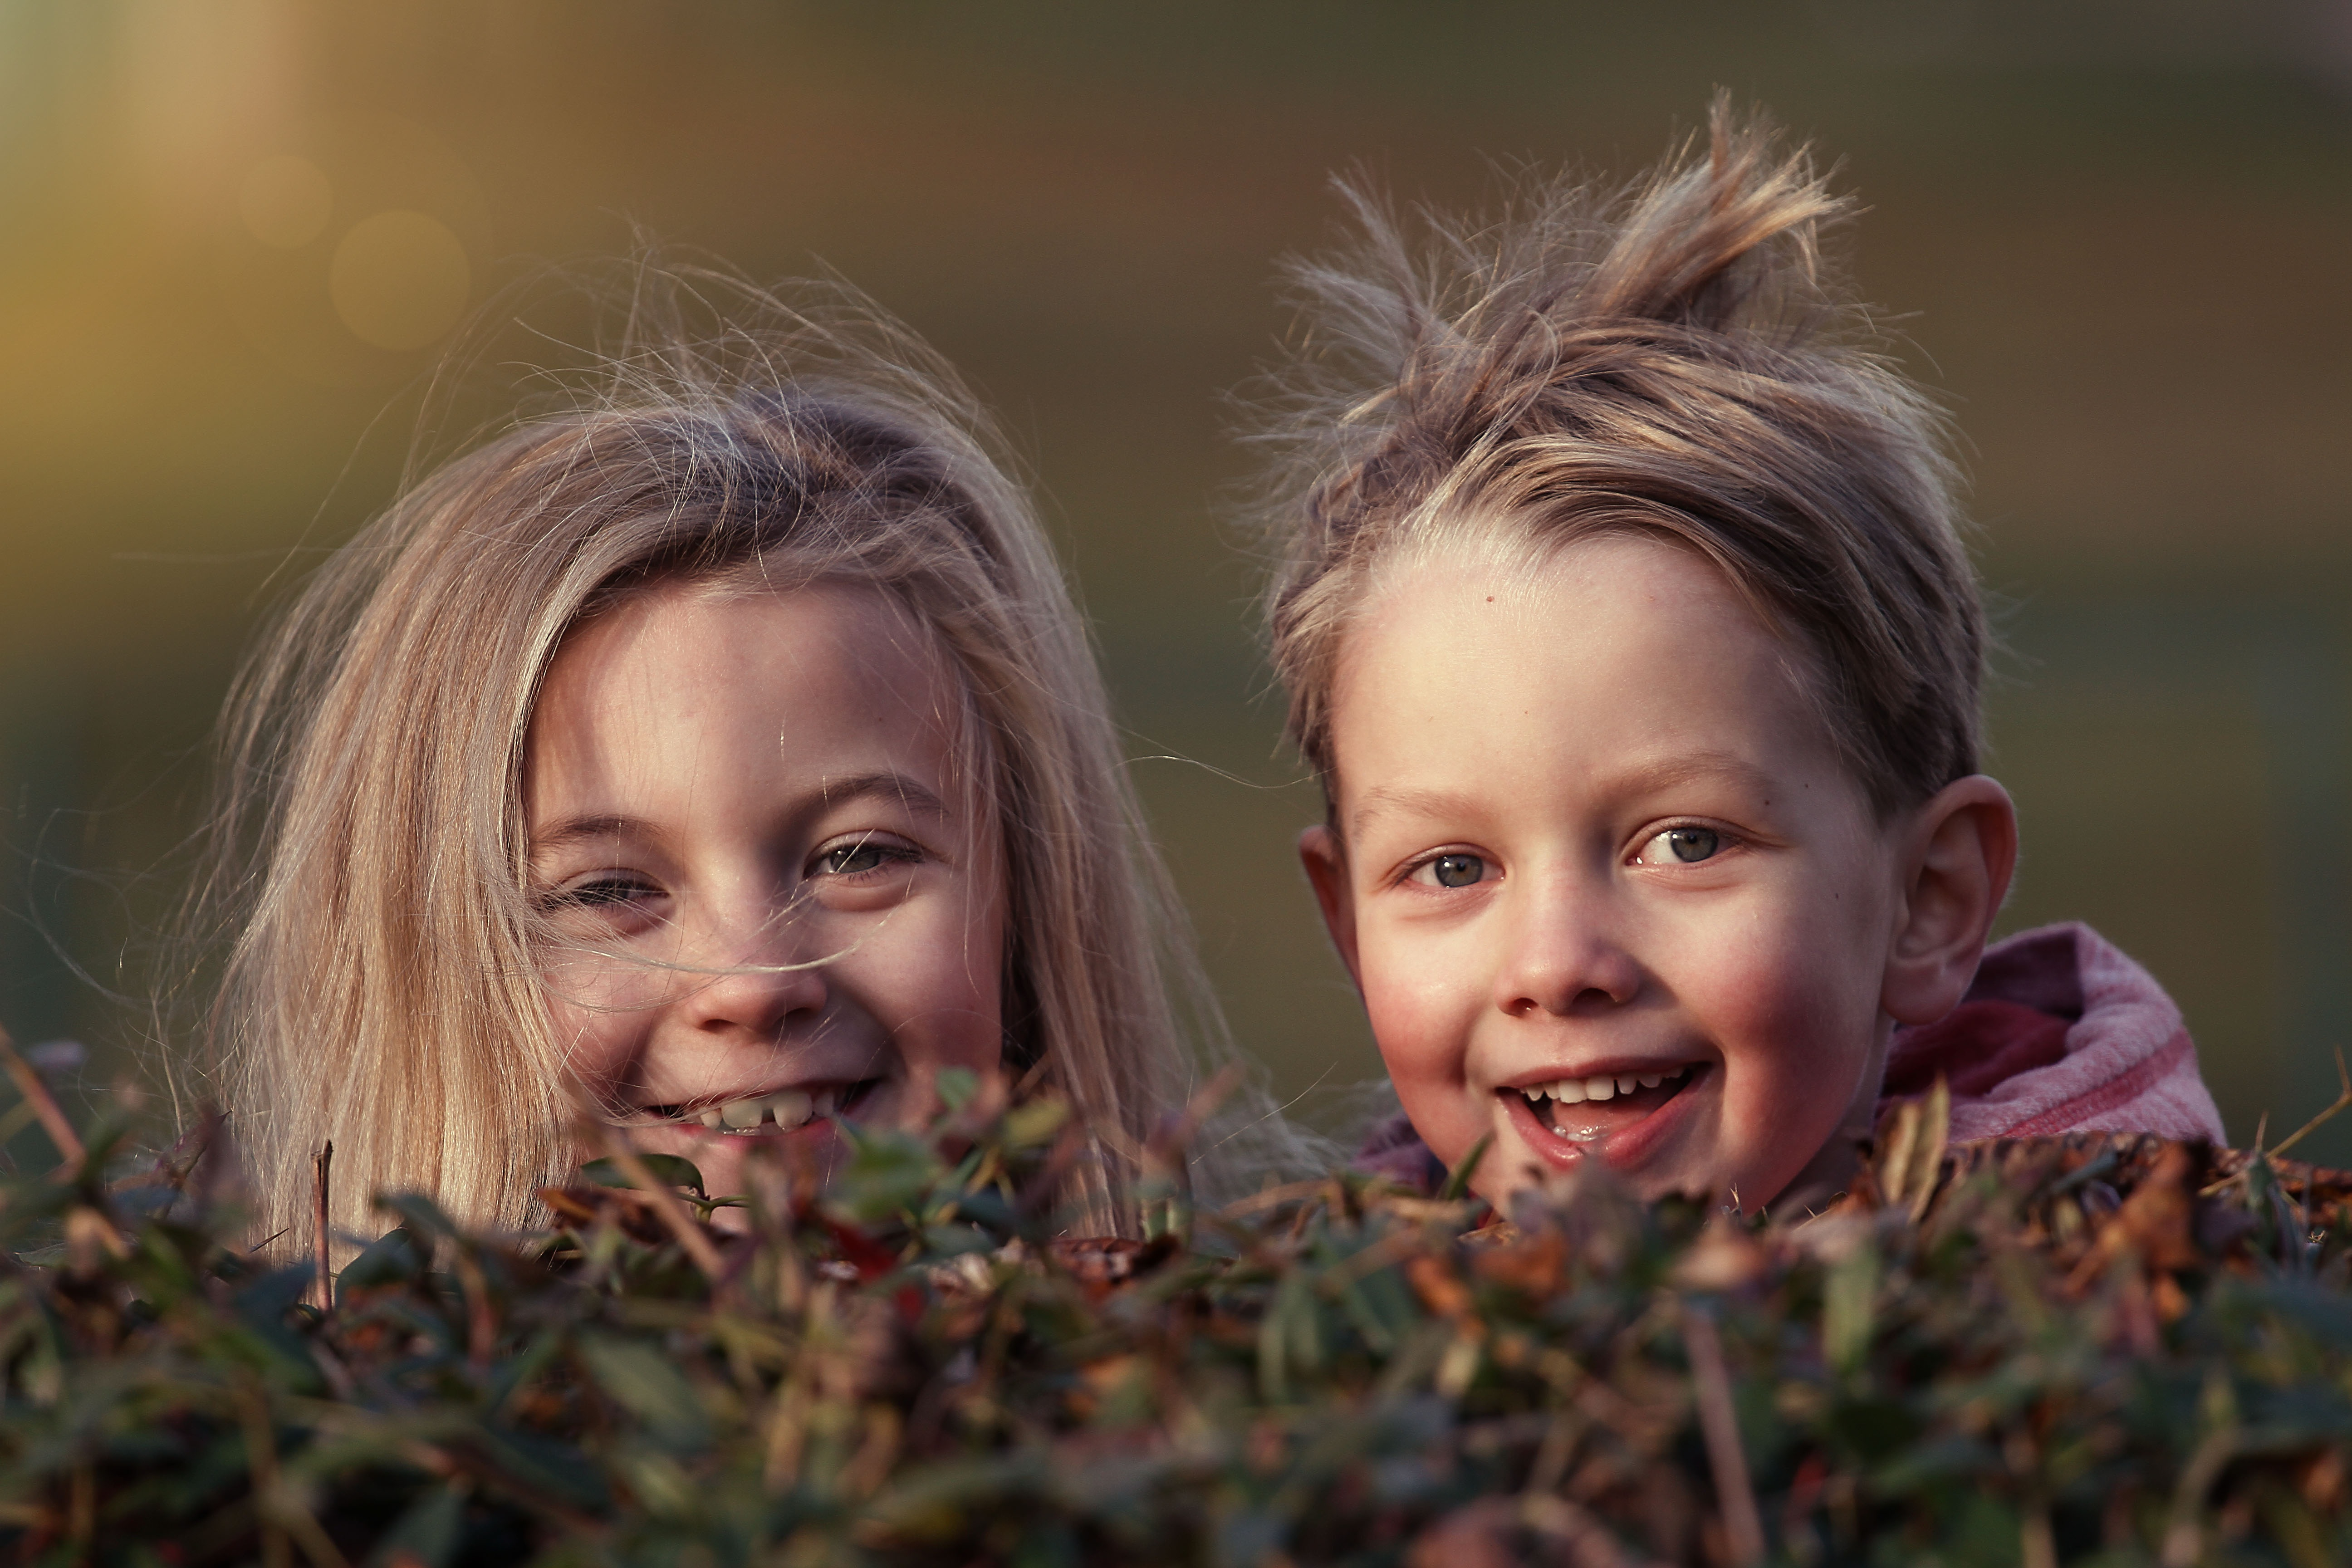 Canva - Children Laughing Outdoors